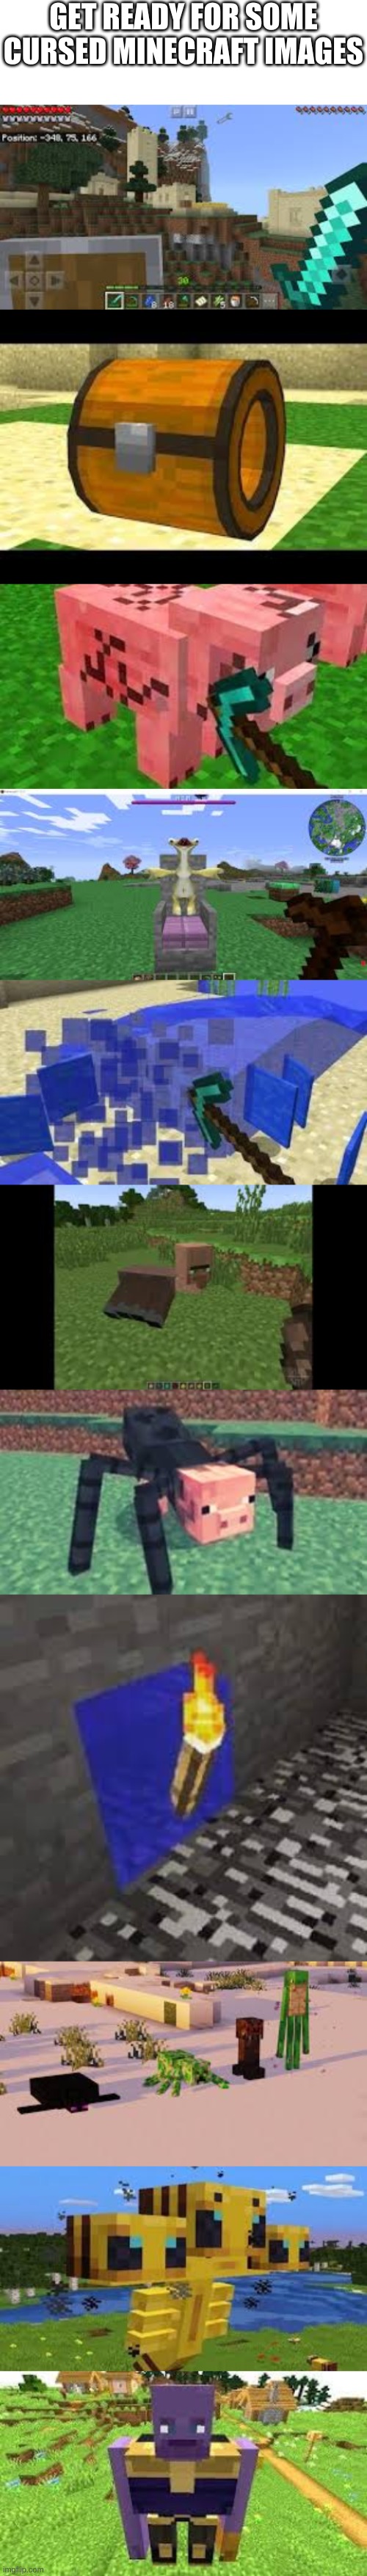 THIS IS ALL UNHOLY!!! | GET READY FOR SOME CURSED MINECRAFT IMAGES | image tagged in blank white template,minecraft,cursed image,thanos | made w/ Imgflip meme maker